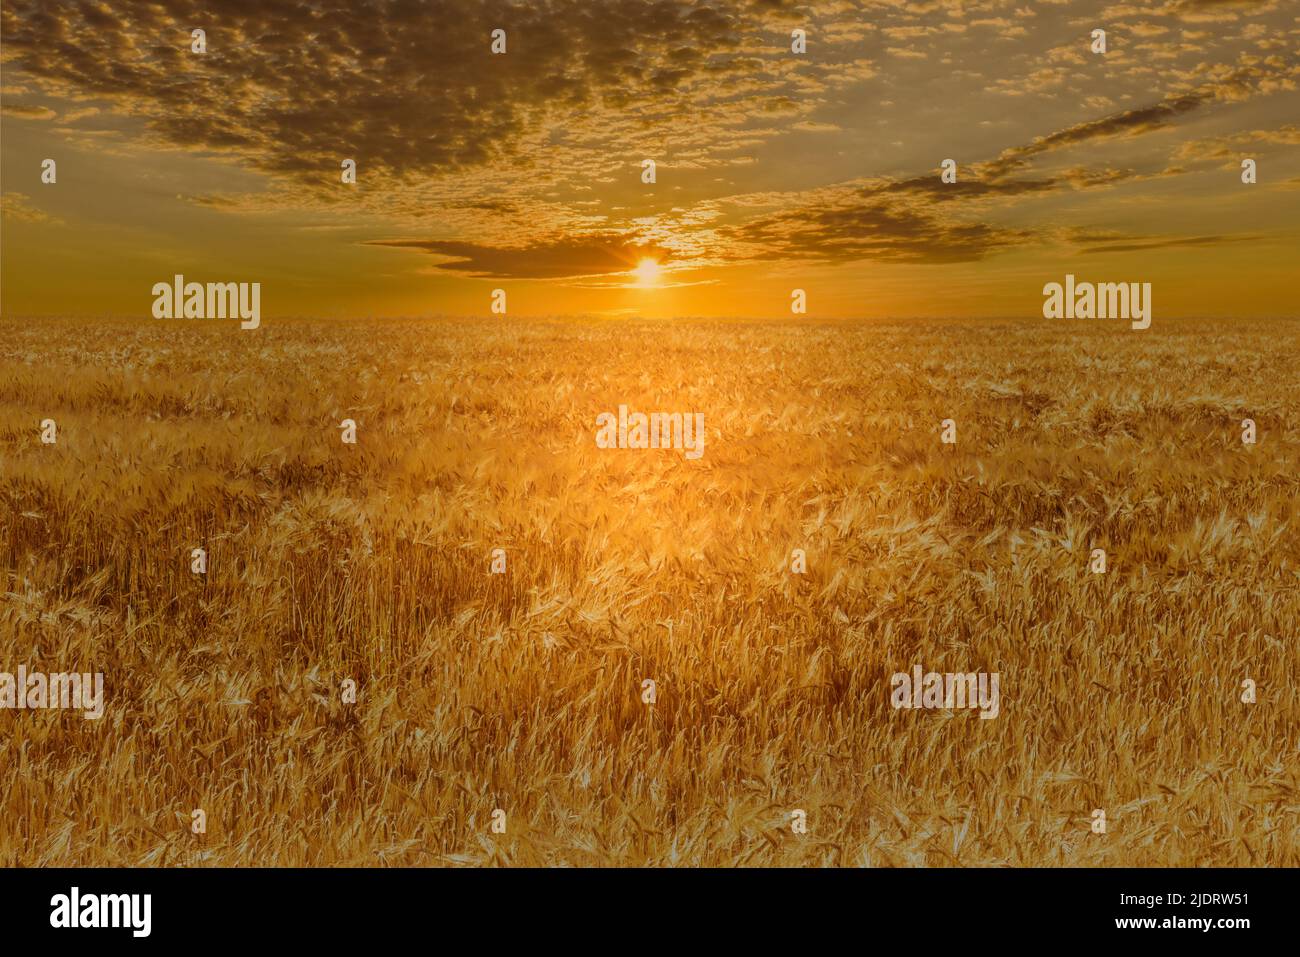 Huge field of barley with setting sun with sky with clouds, picturesque landscape with warm sunset tones Stock Photo